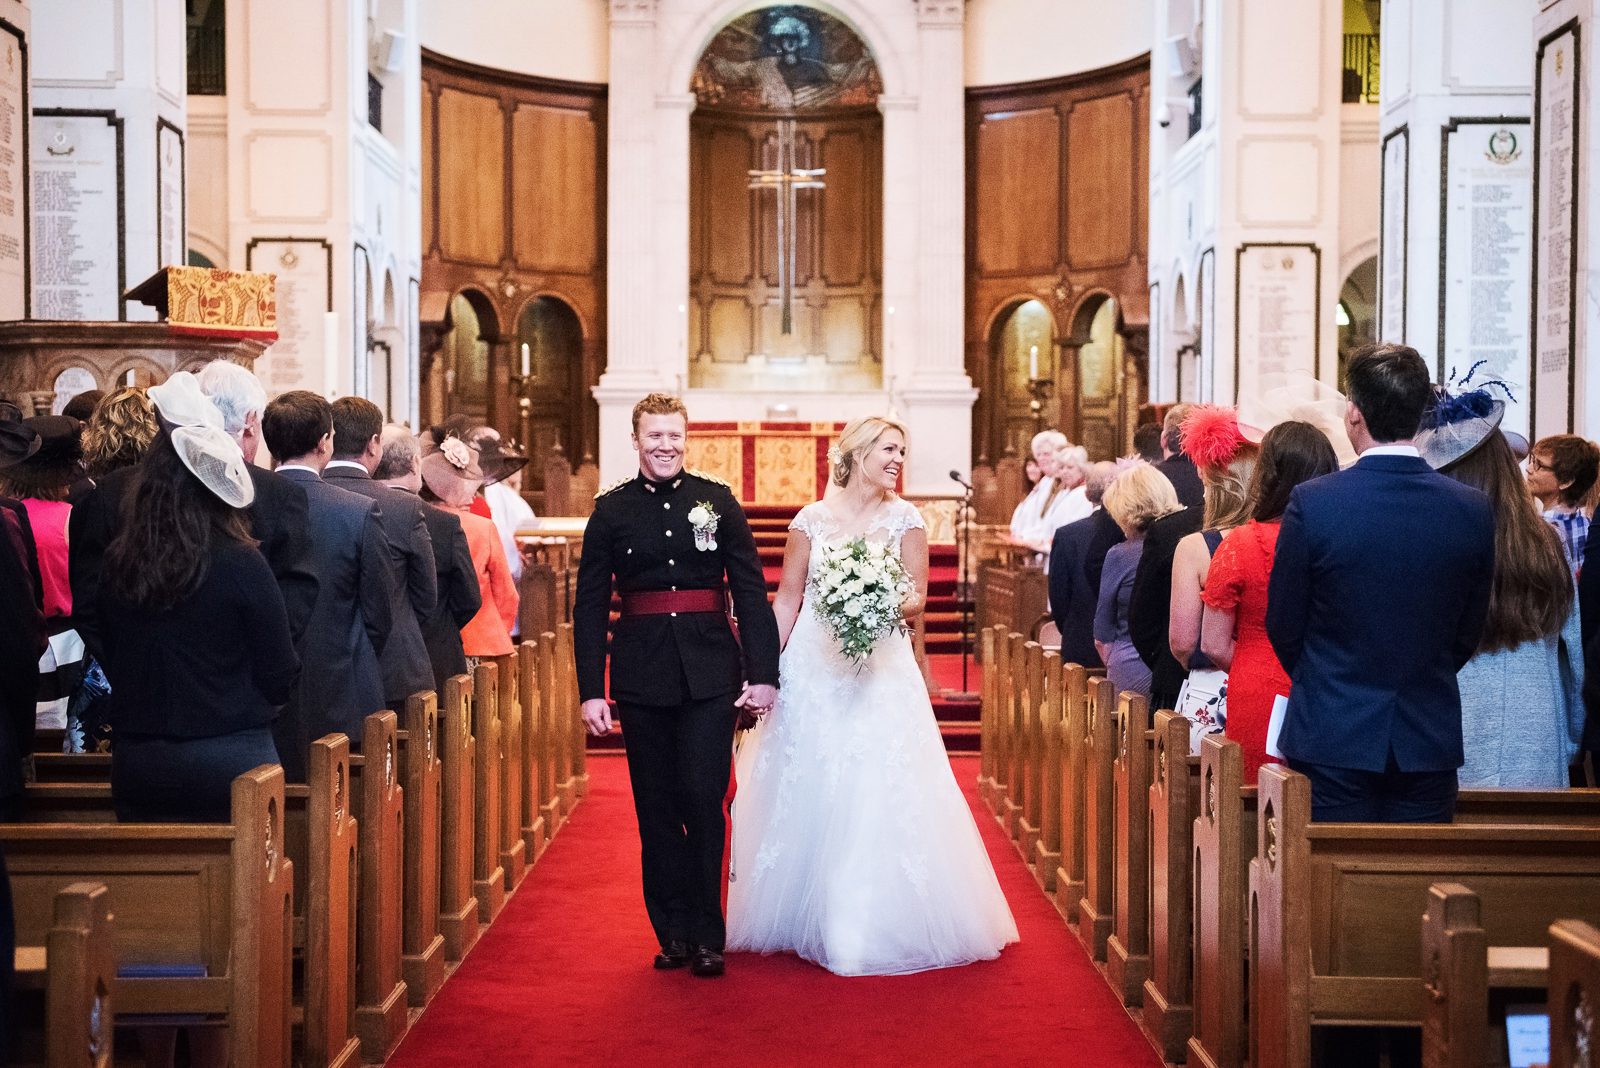 A bride and groom walk back down the aisle of the military chapel at Sandhurst academy.